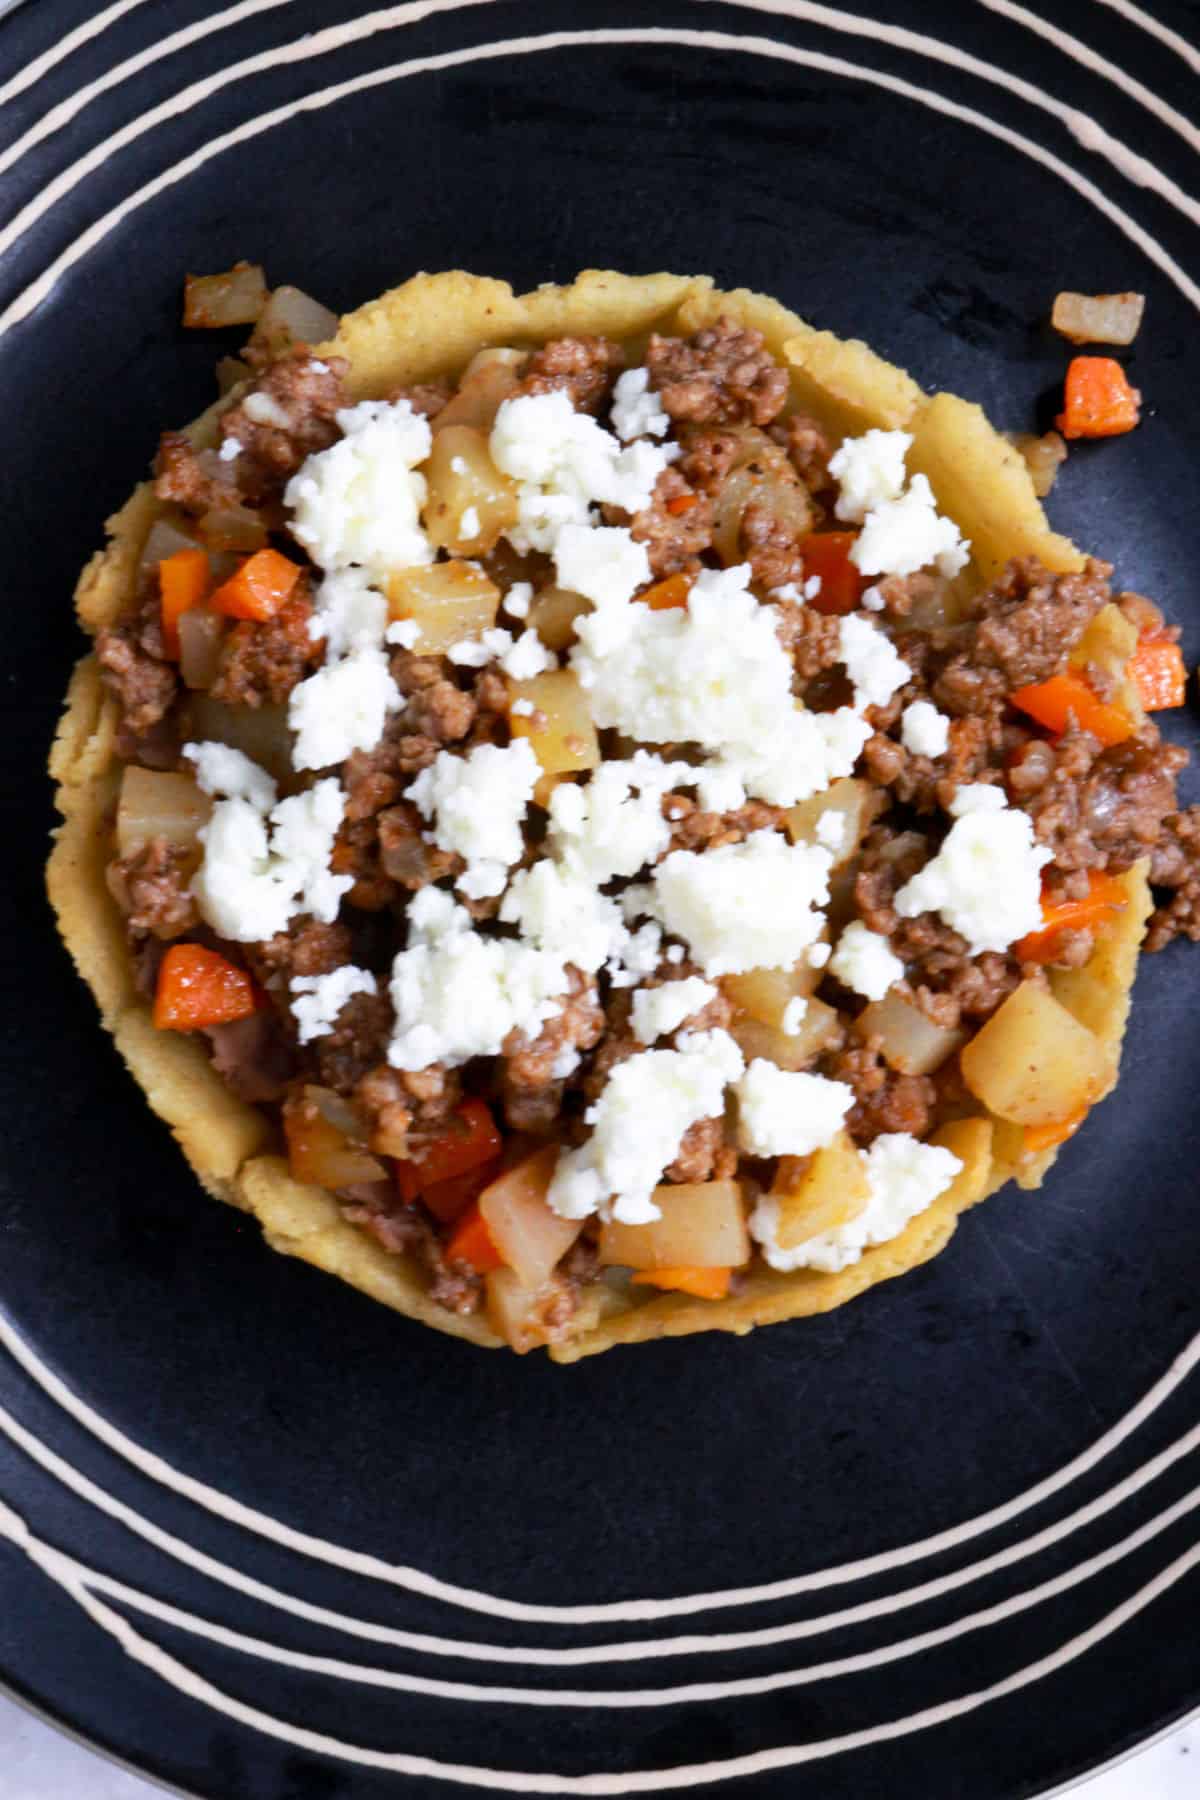 A sope with beans, picadillo and queso fresco on a black plate